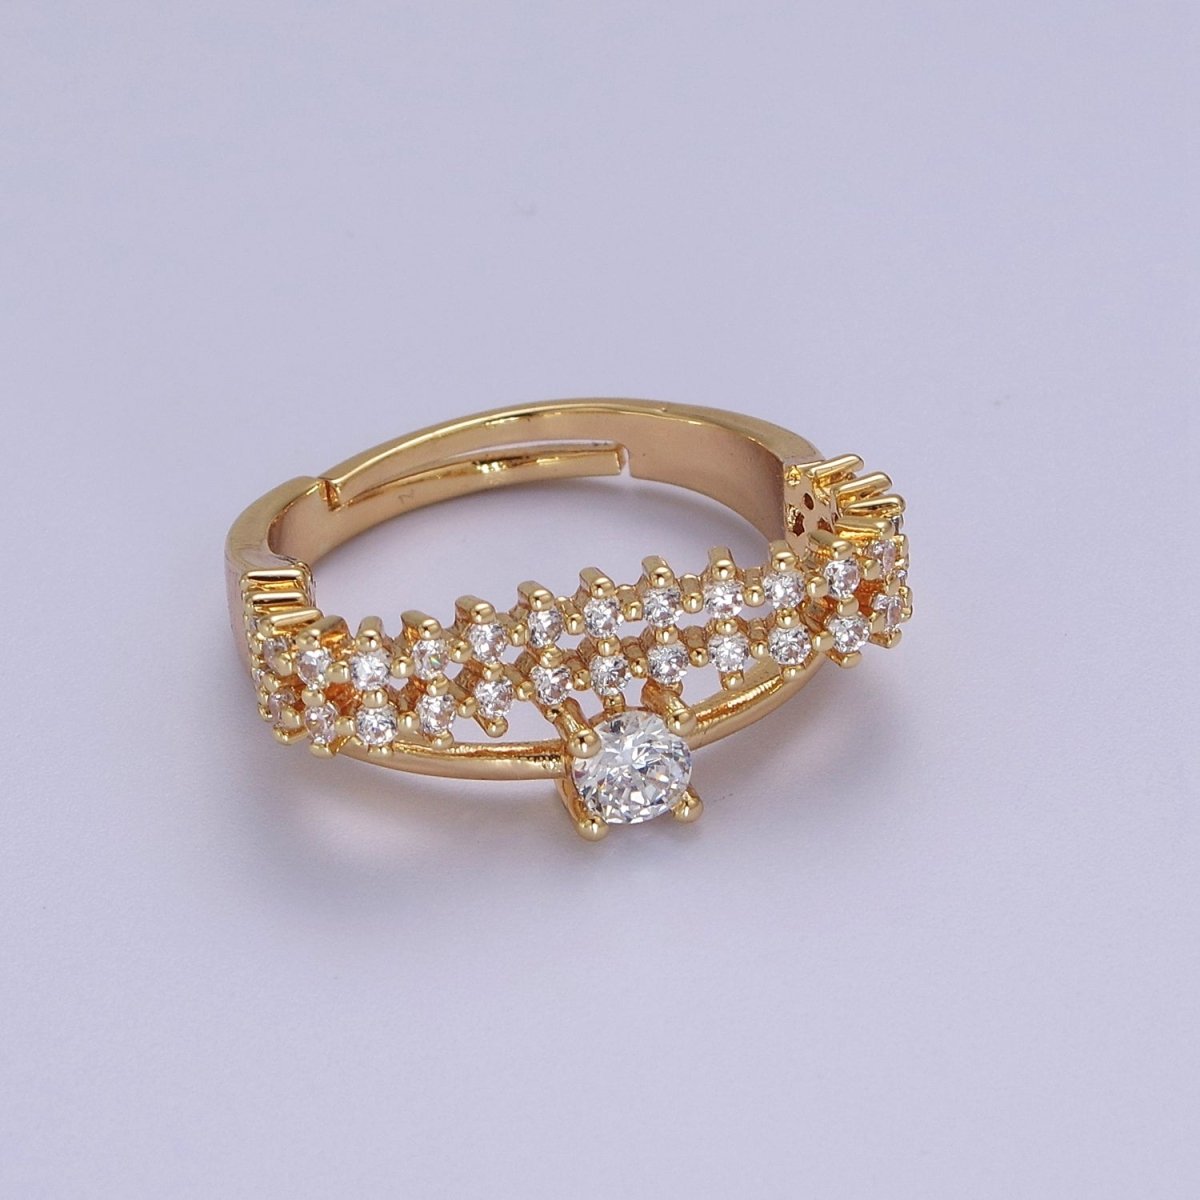 14k Gold Filled Statement Ring, CZ Micro Pave Ring, Everyday Ring, Open Adjustable Ring S-536 - DLUXCA